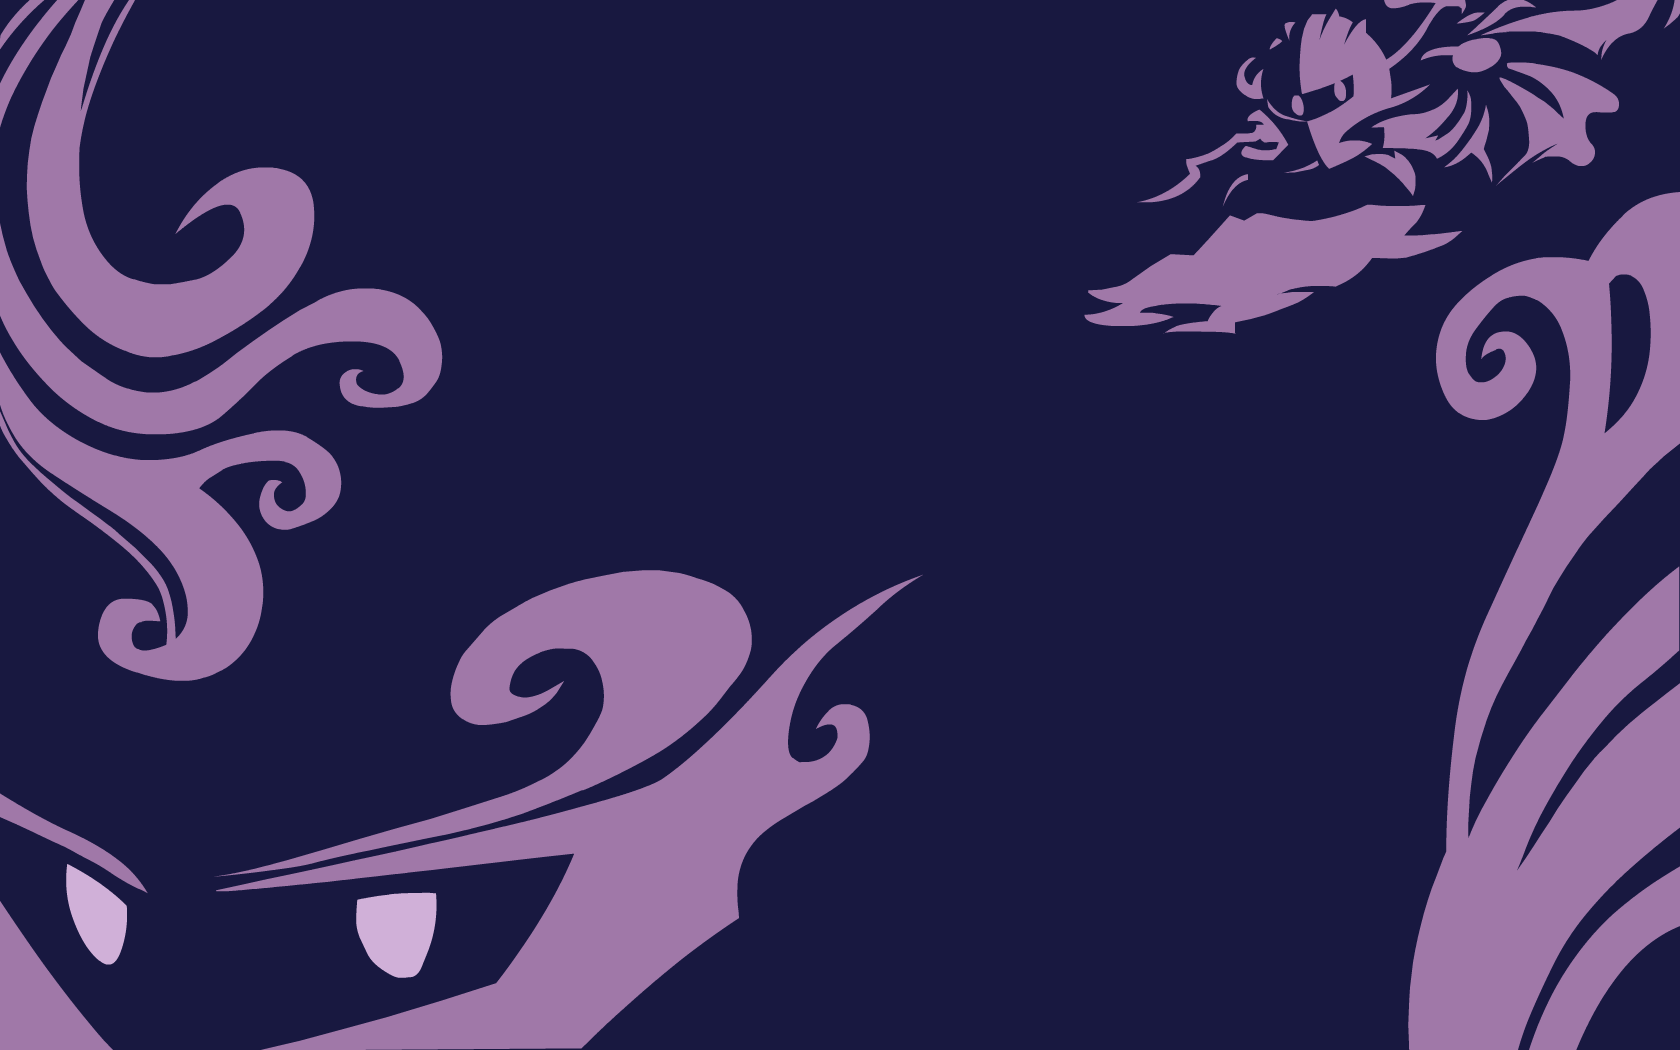 Dark Meta Knight Background Images and Wallpapers  YL Computing